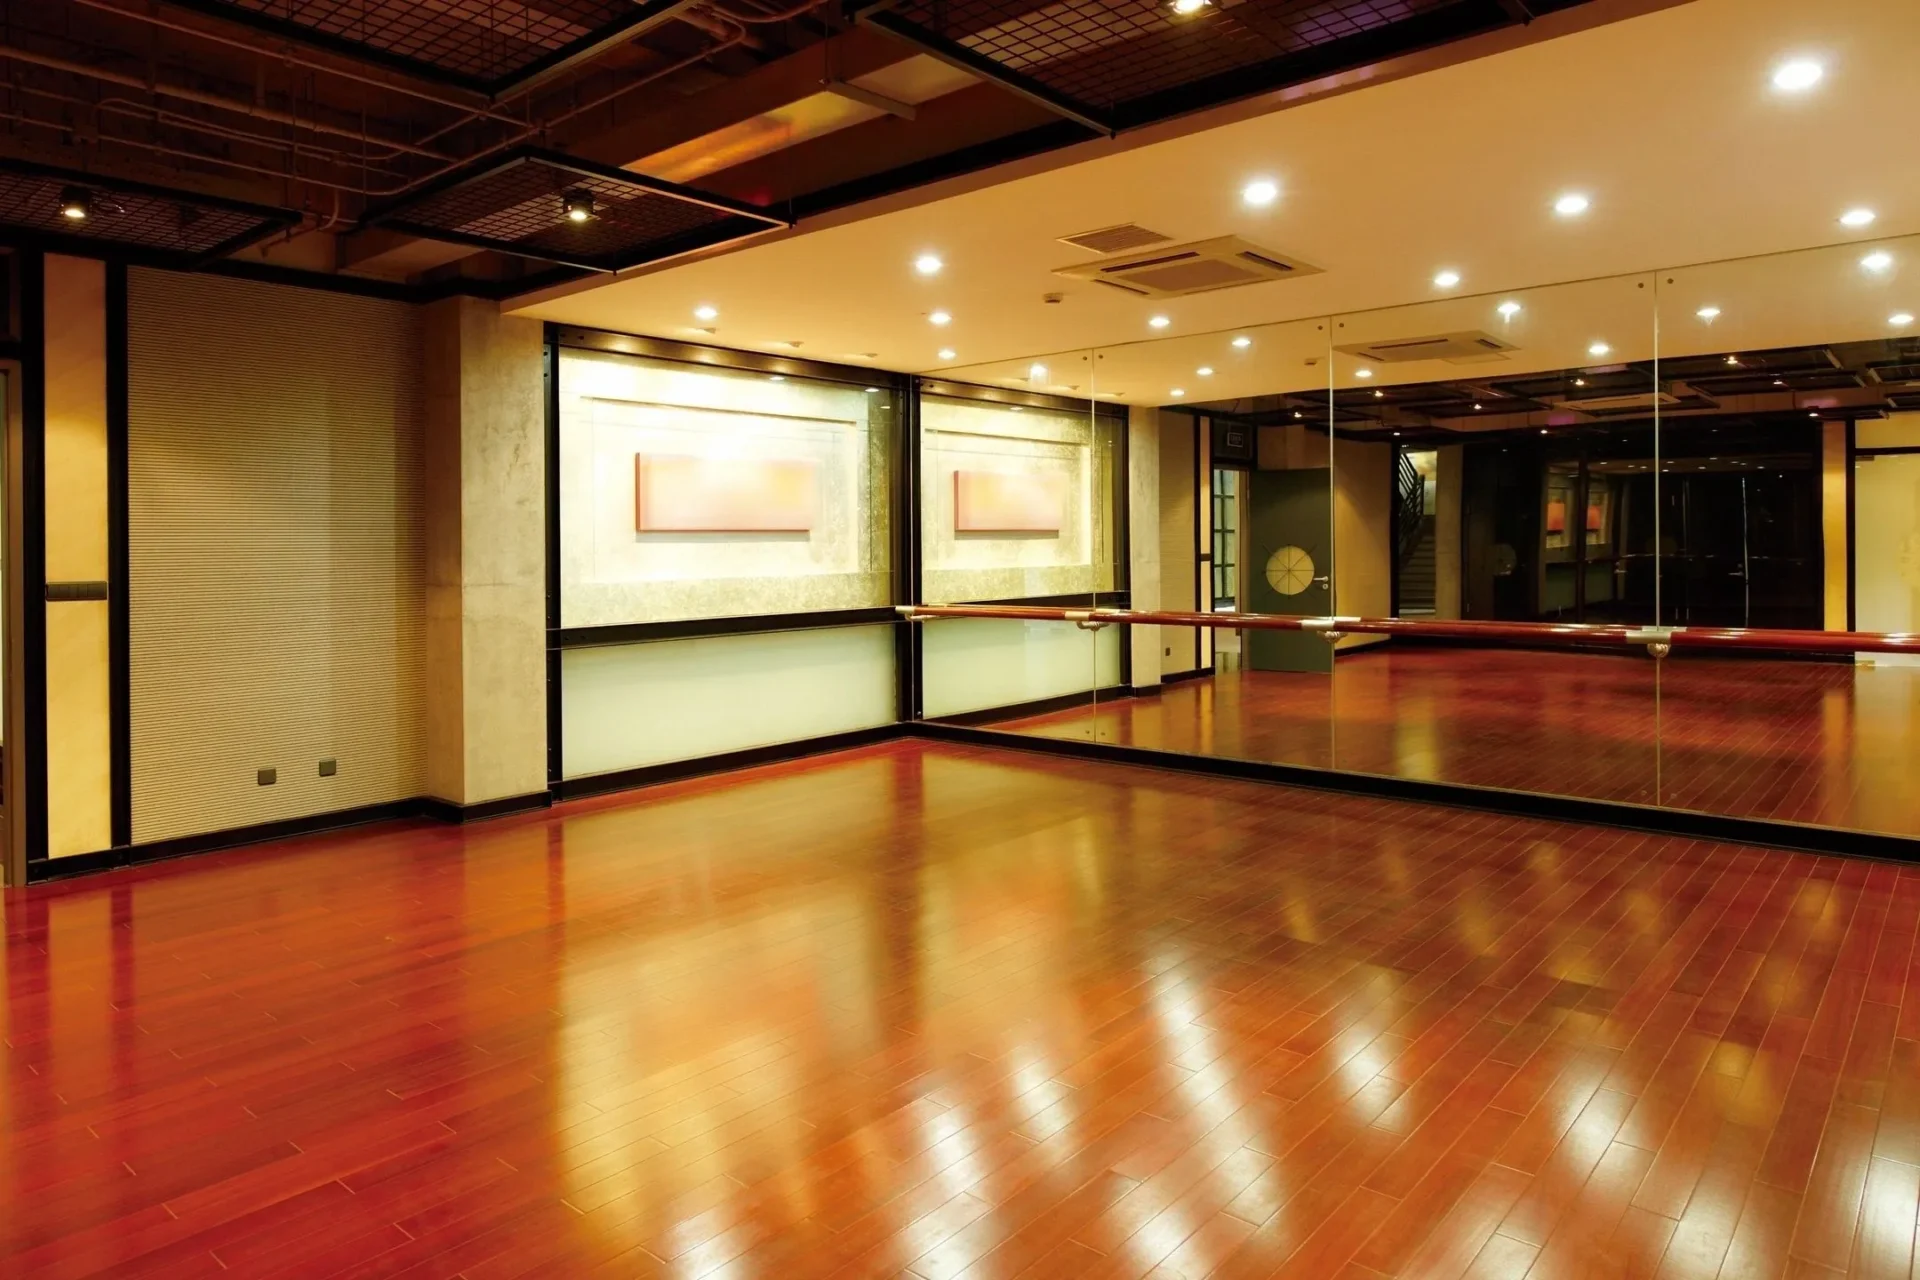 A dance studio with mirrors and wooden floors